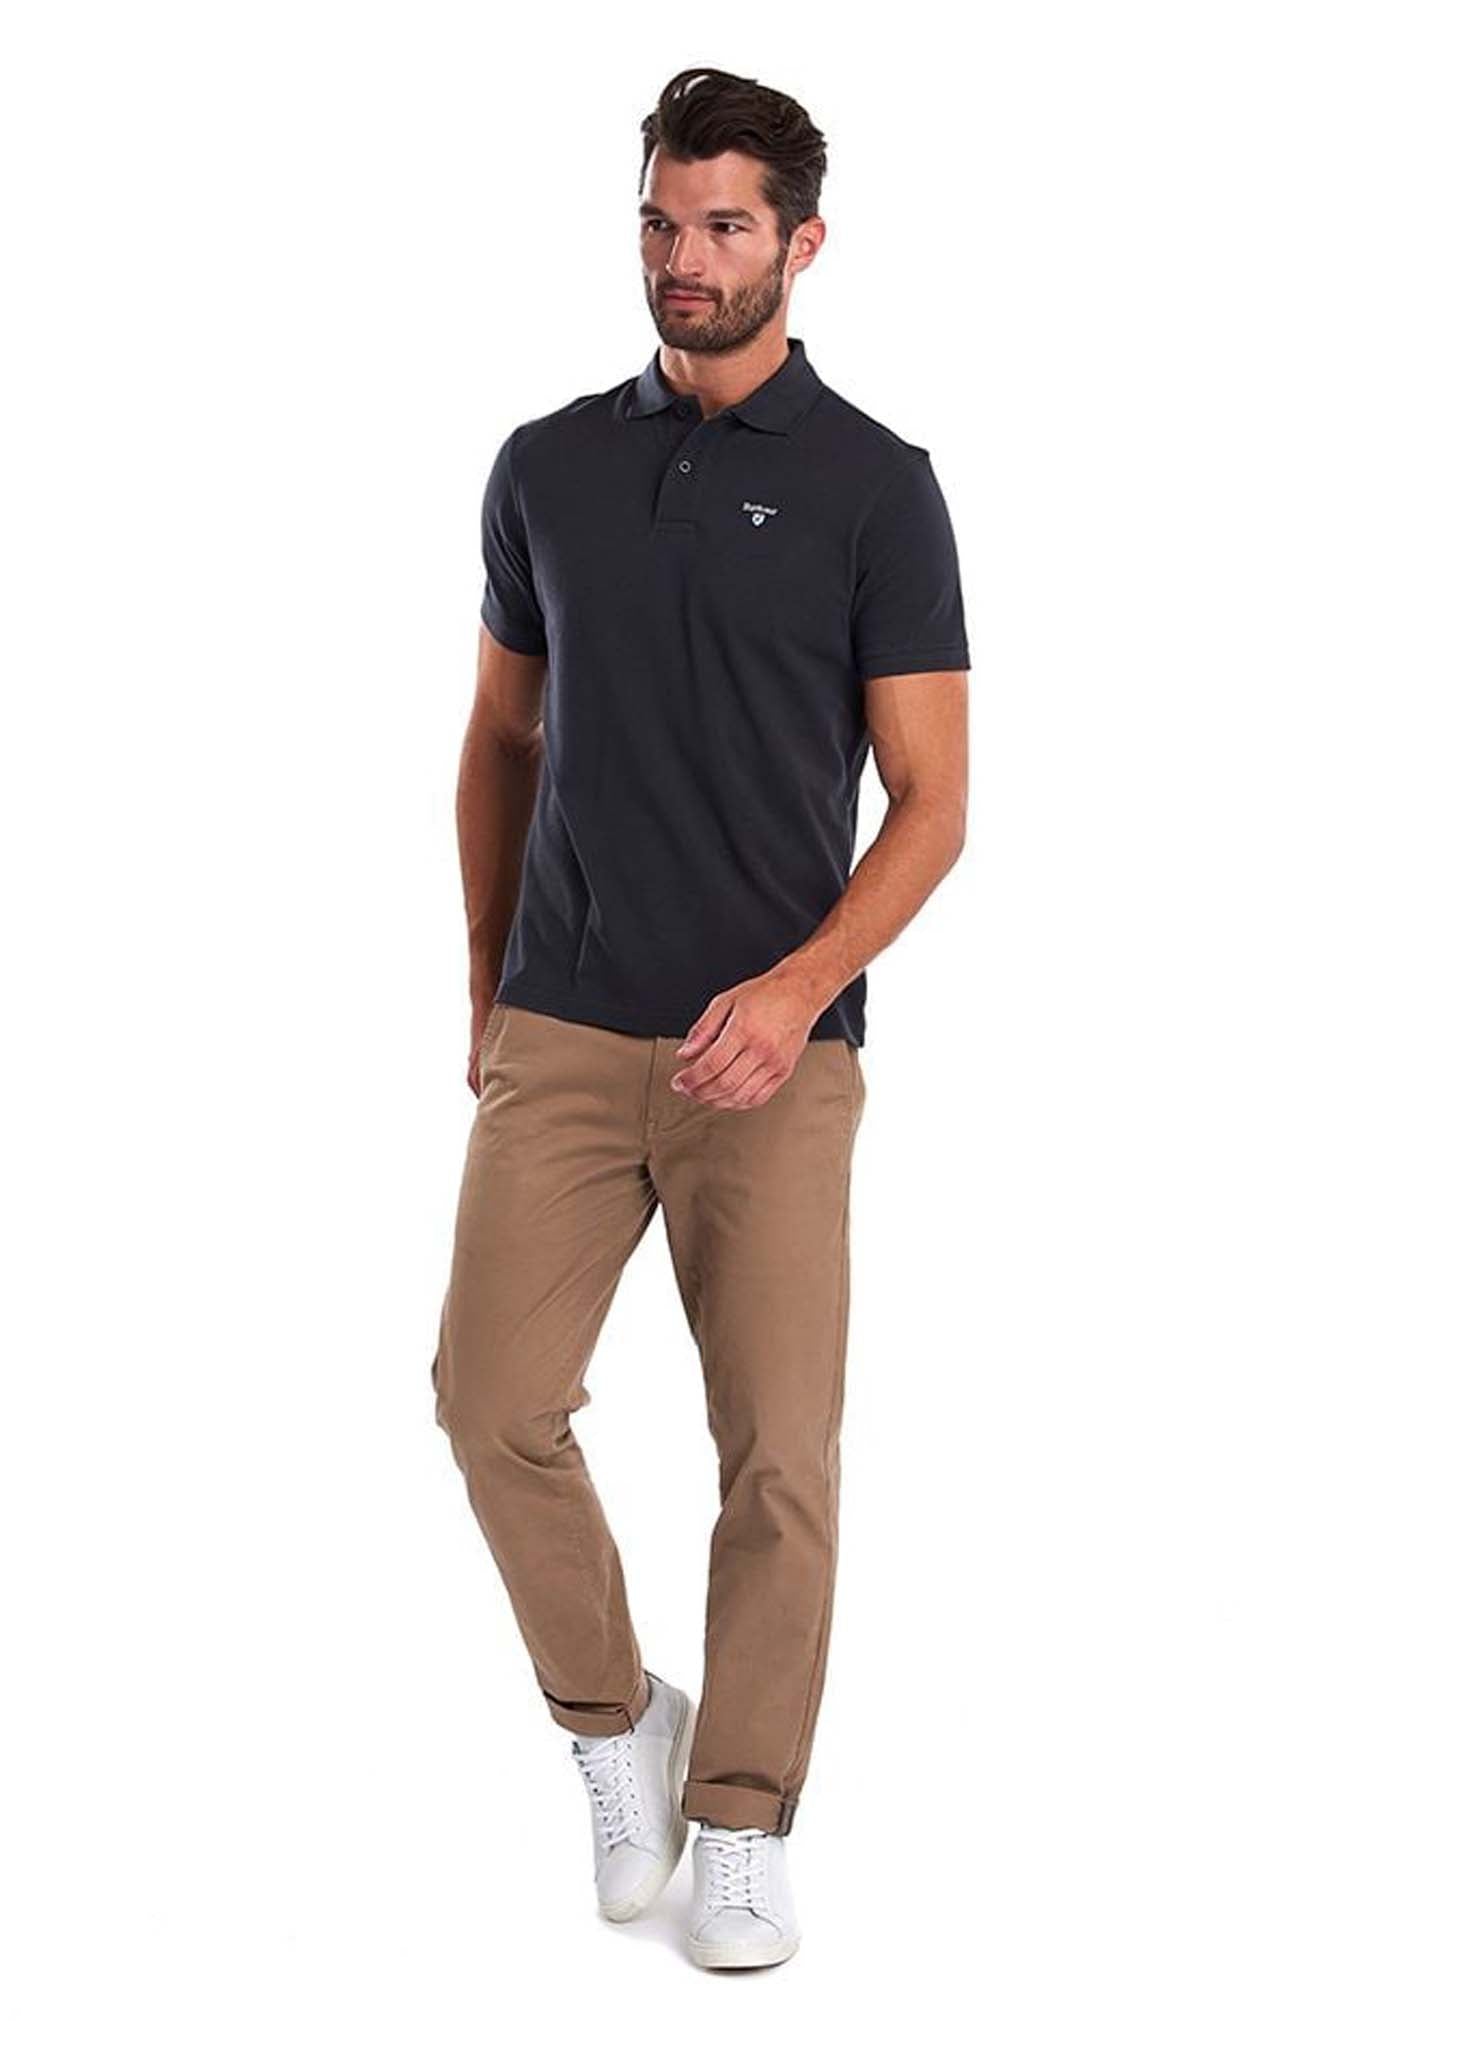 barbour sports polo - grey navy